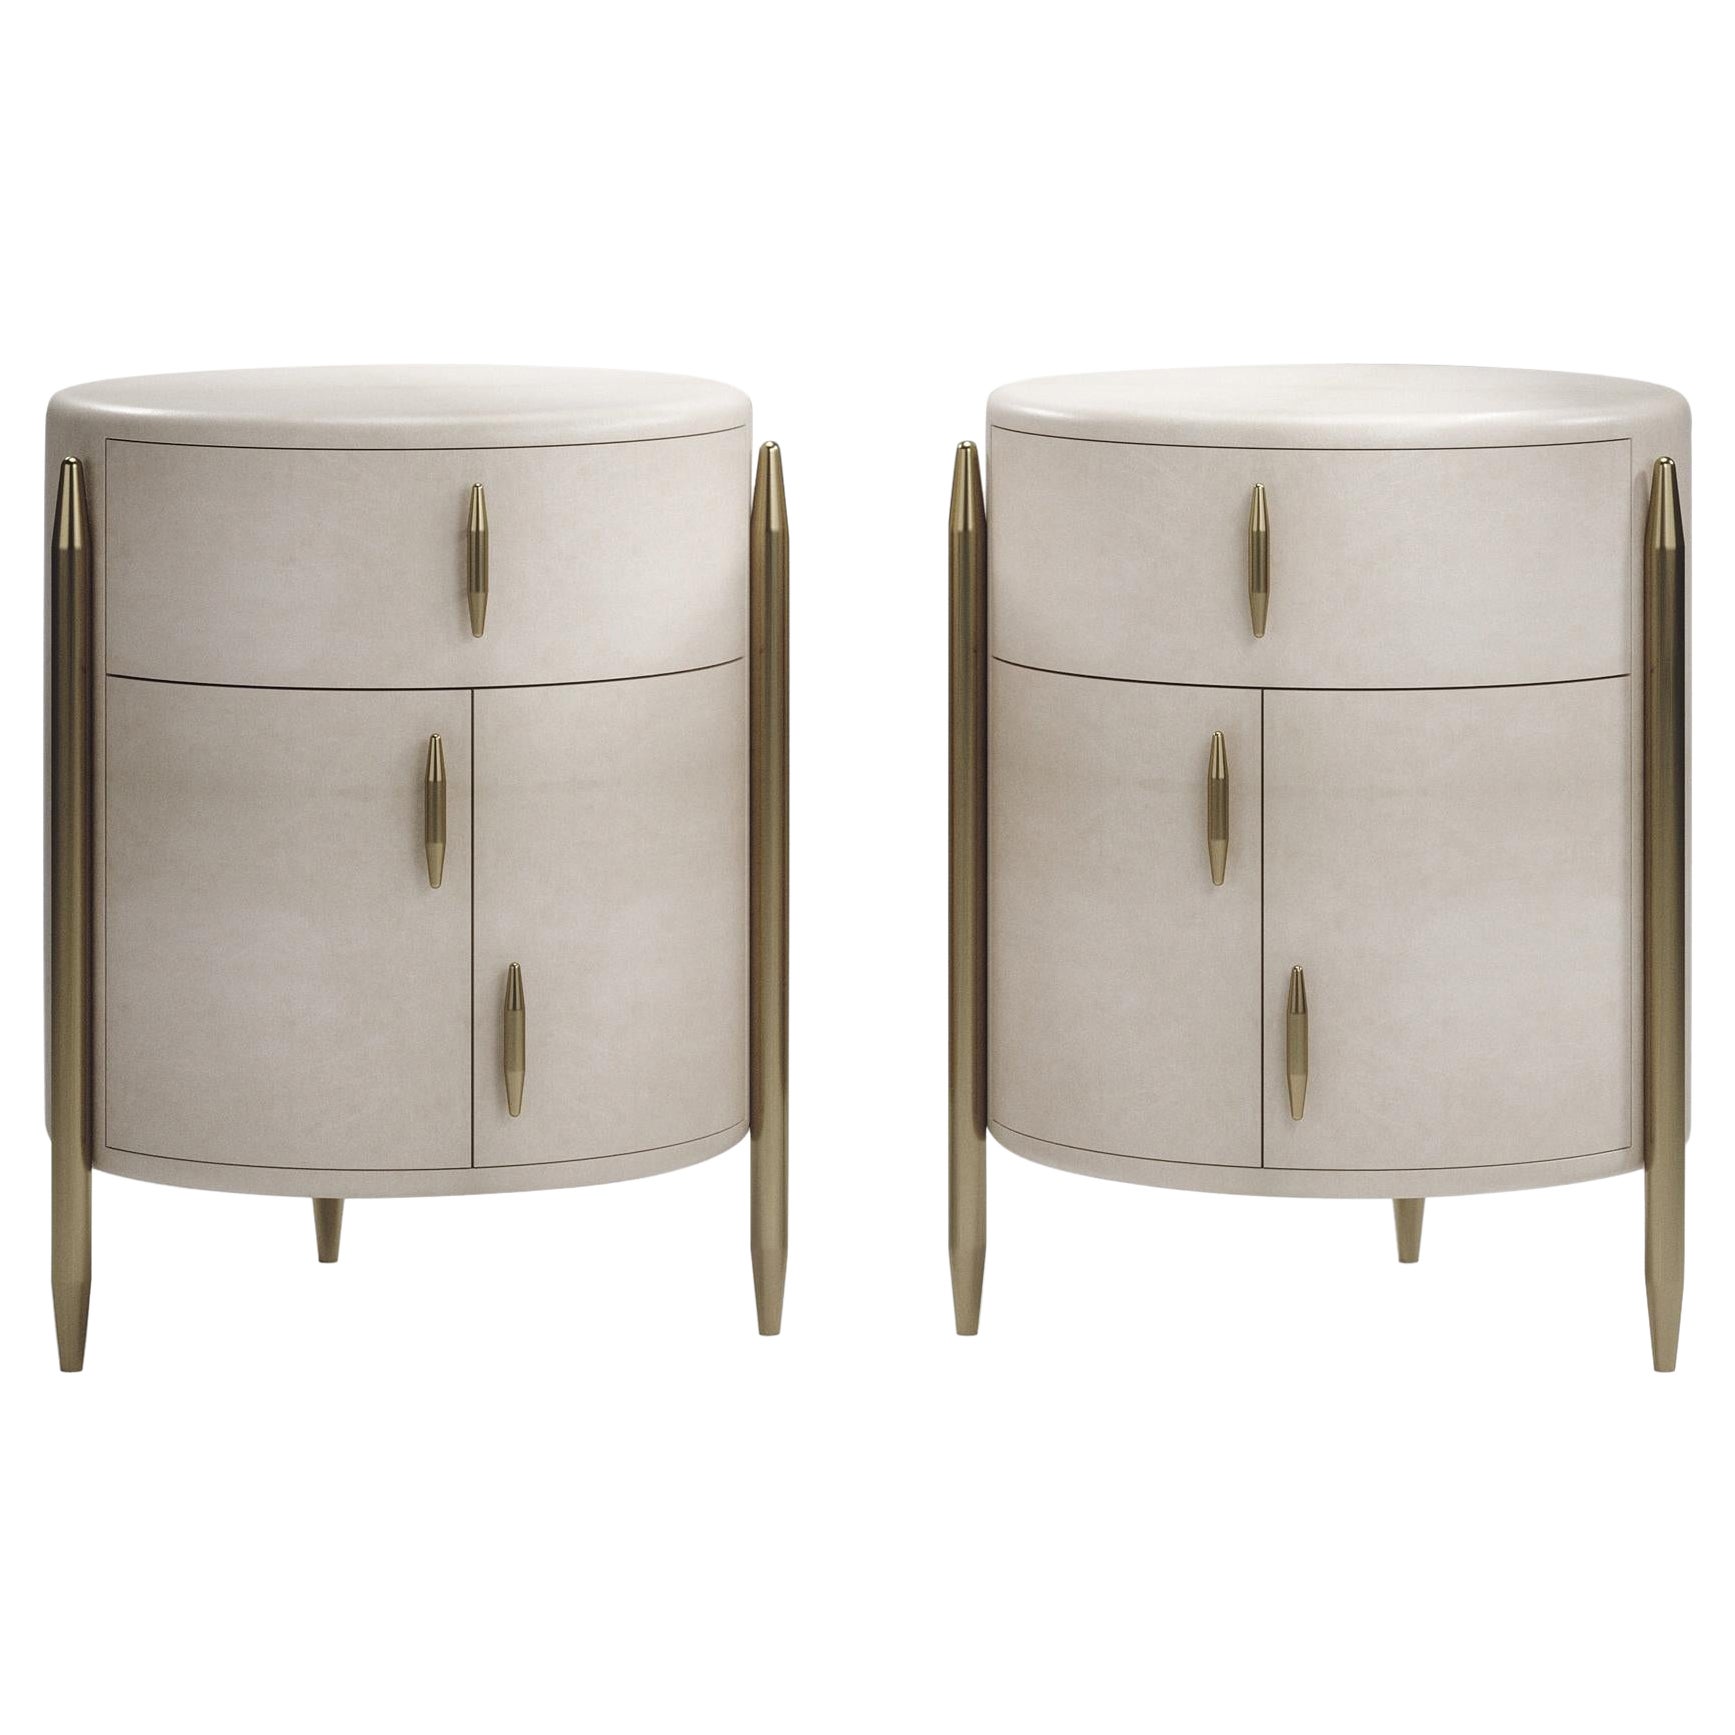 Pair of Parchment Night Stands with Brass Accents by Kifu Paris For Sale